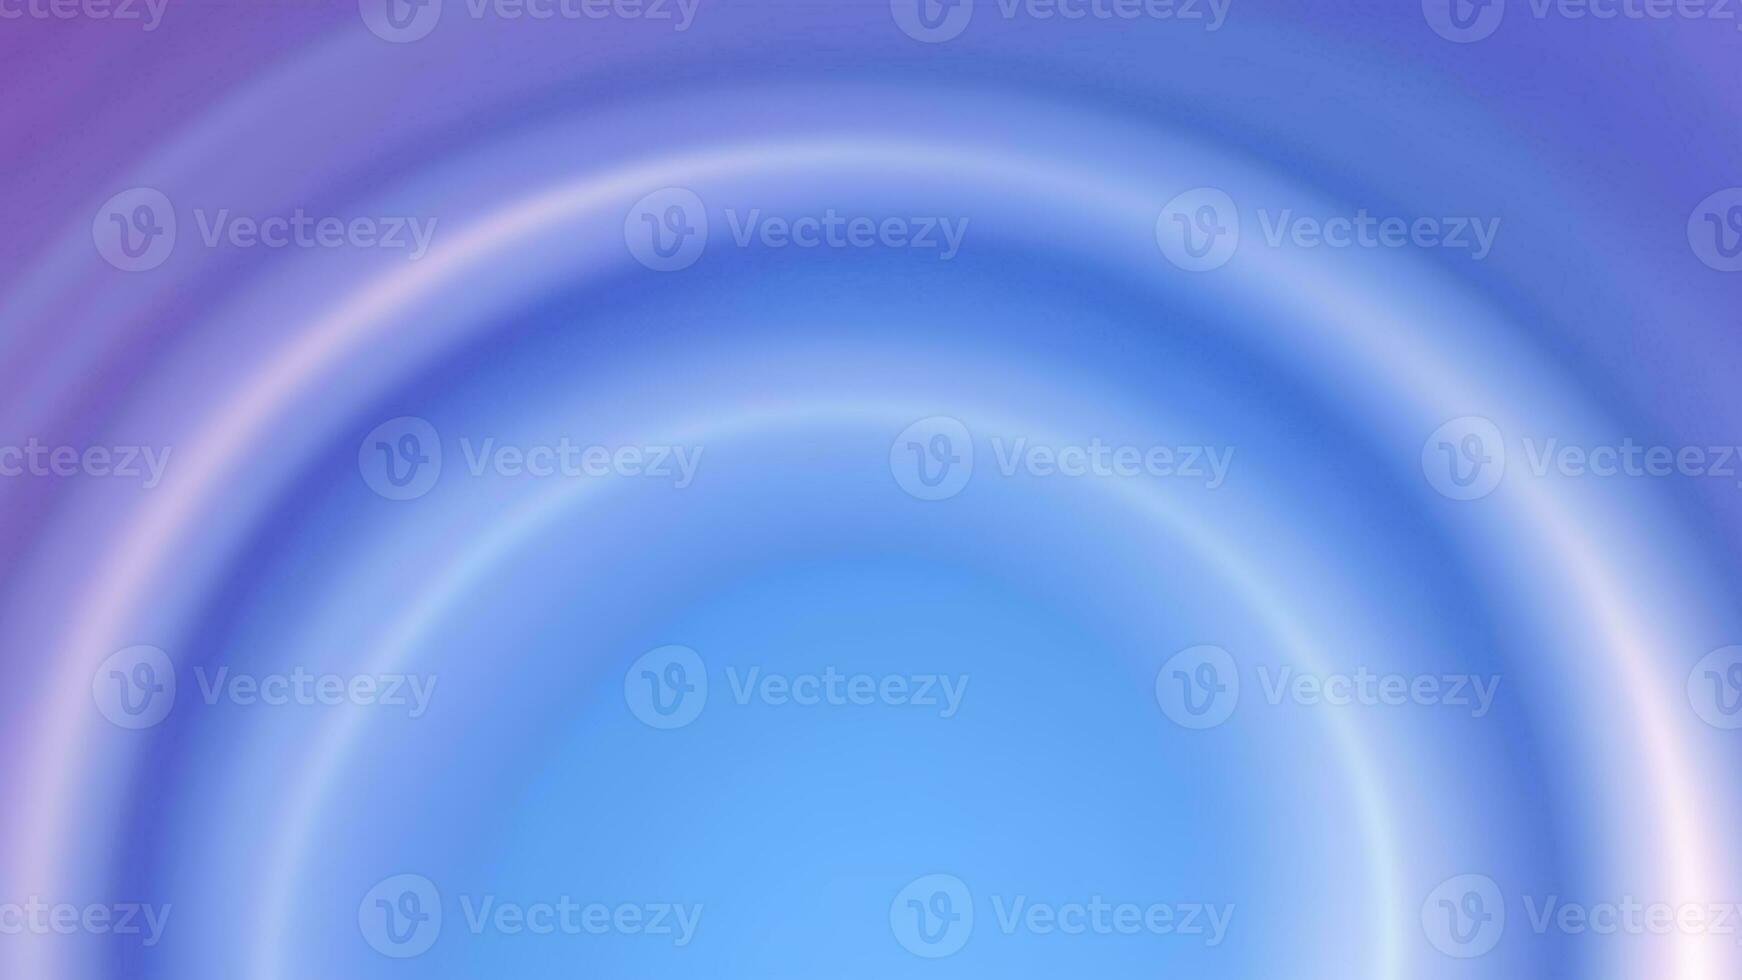 light blue abstract background photo